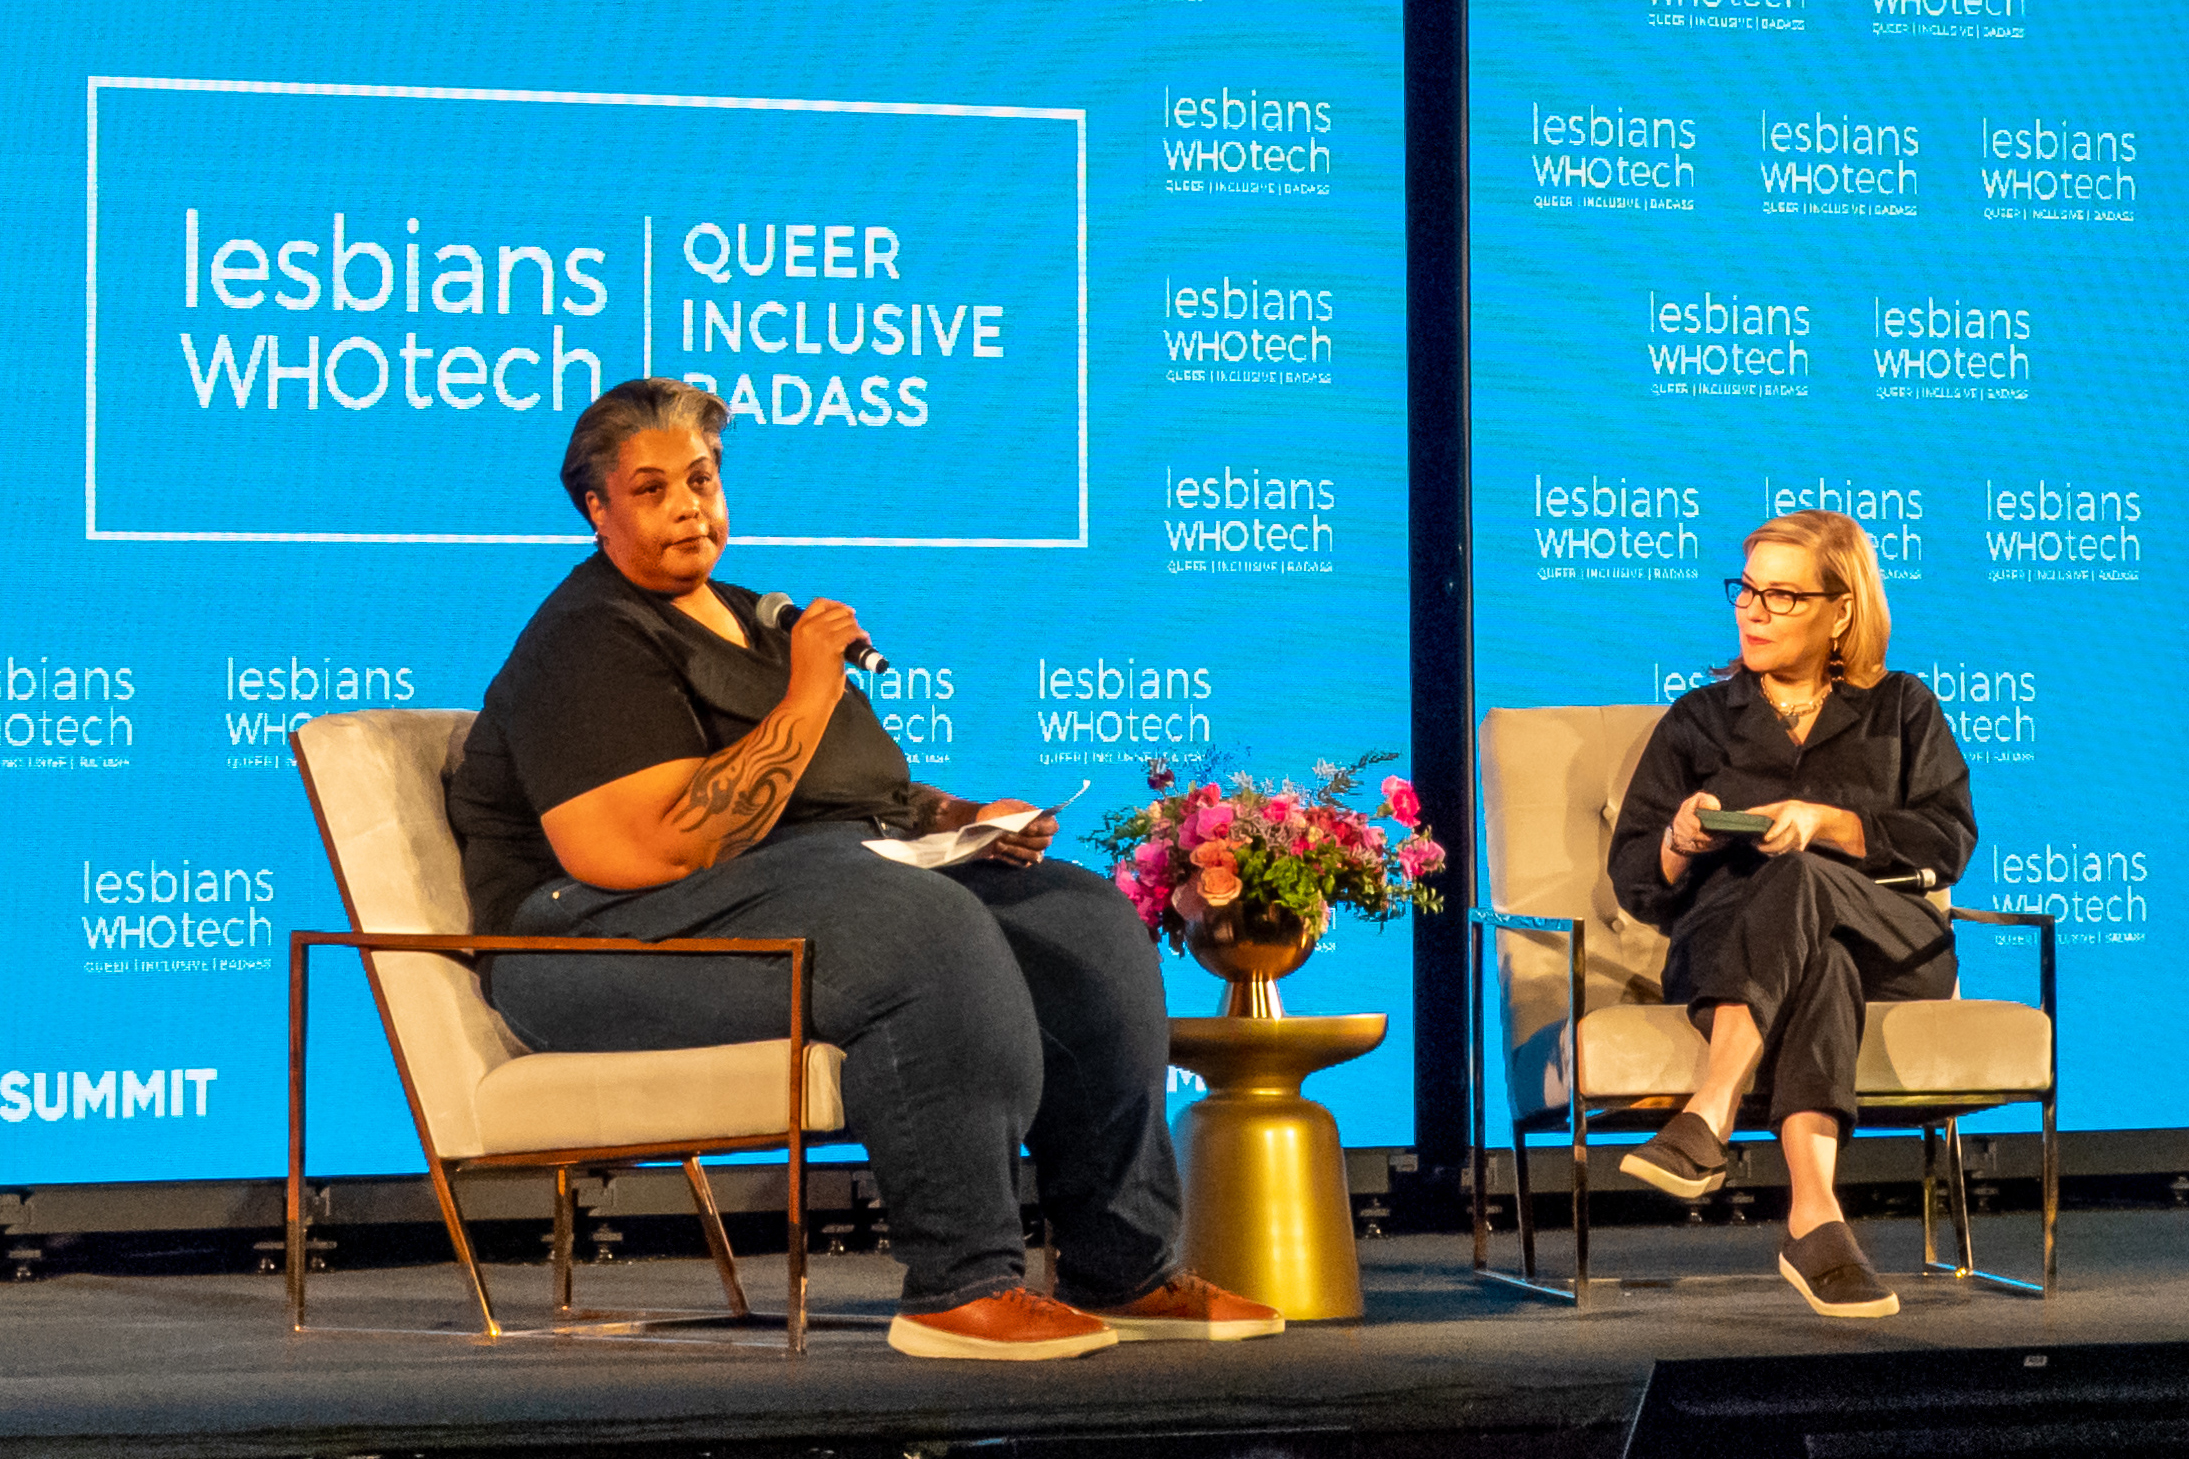 Two people sit onstage at a "Lesbians Who Tech" summit, engaged in a discussion surrounded by branding banners.